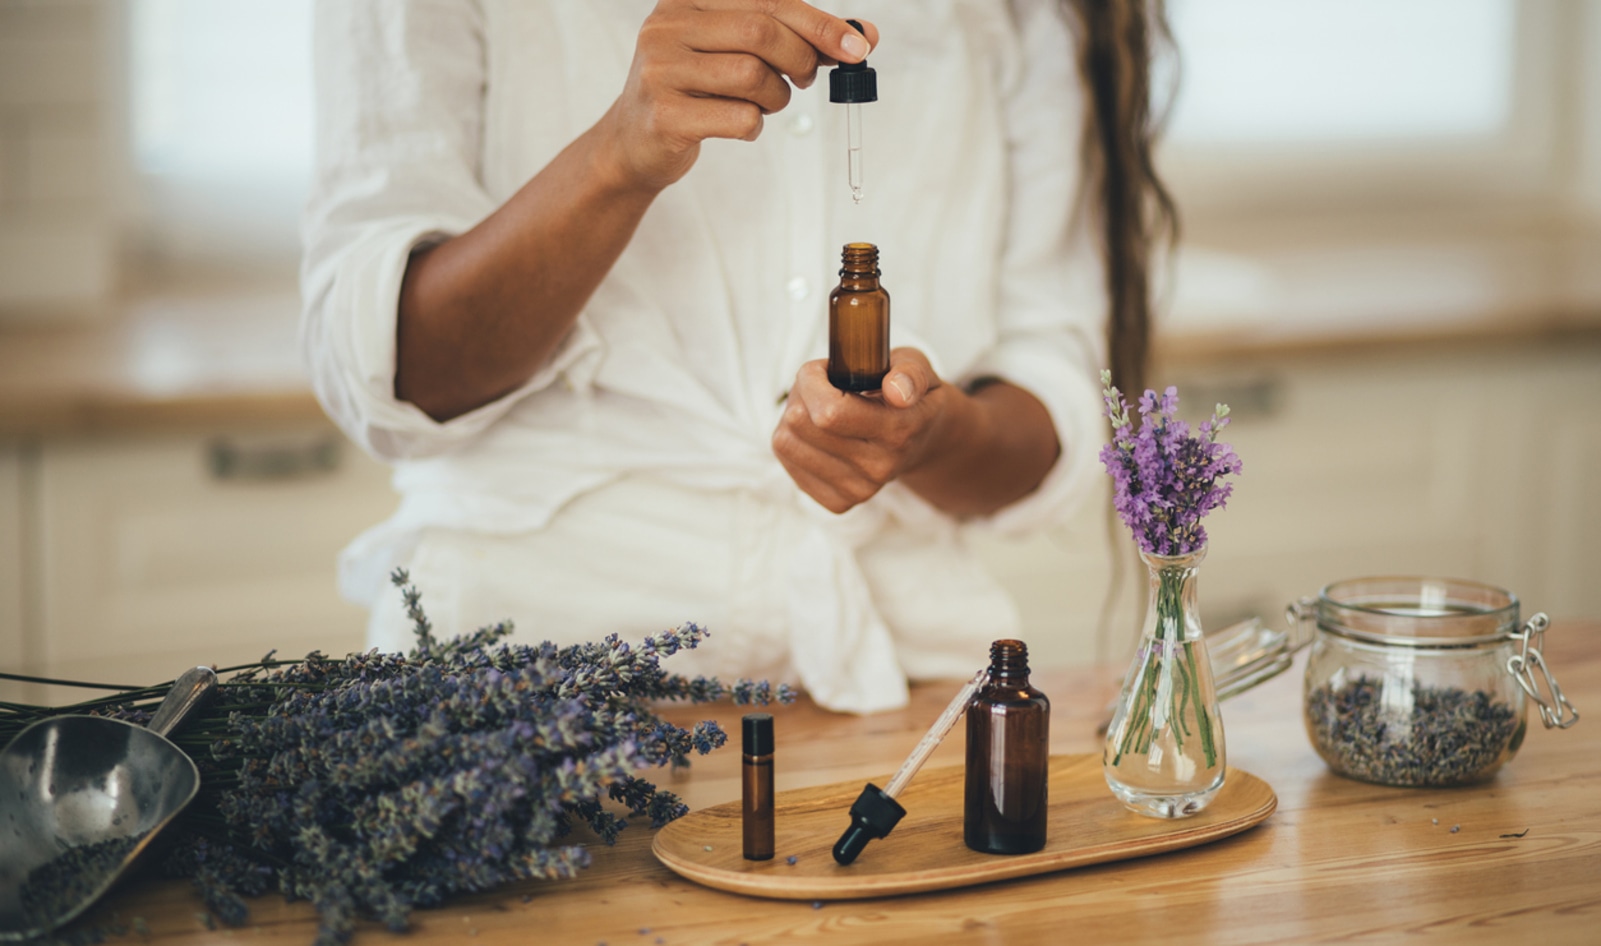 Try Some Essential Oils and Aromatherapy to Beat the Holiday Stress